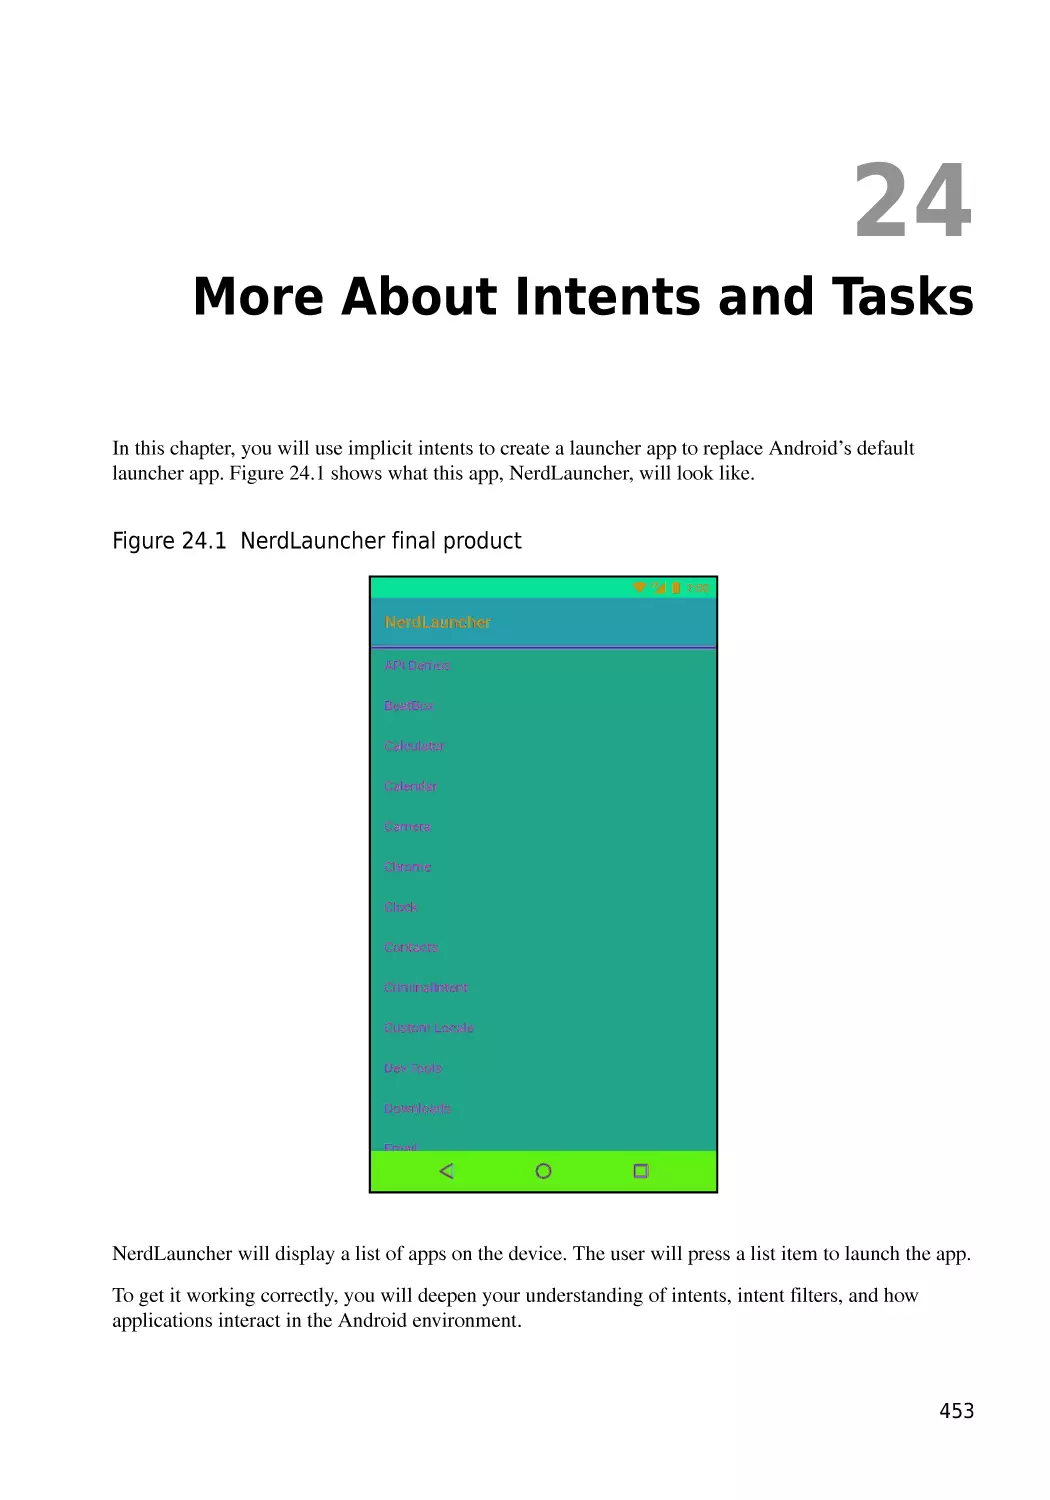 Chapter 24  More About Intents and Tasks